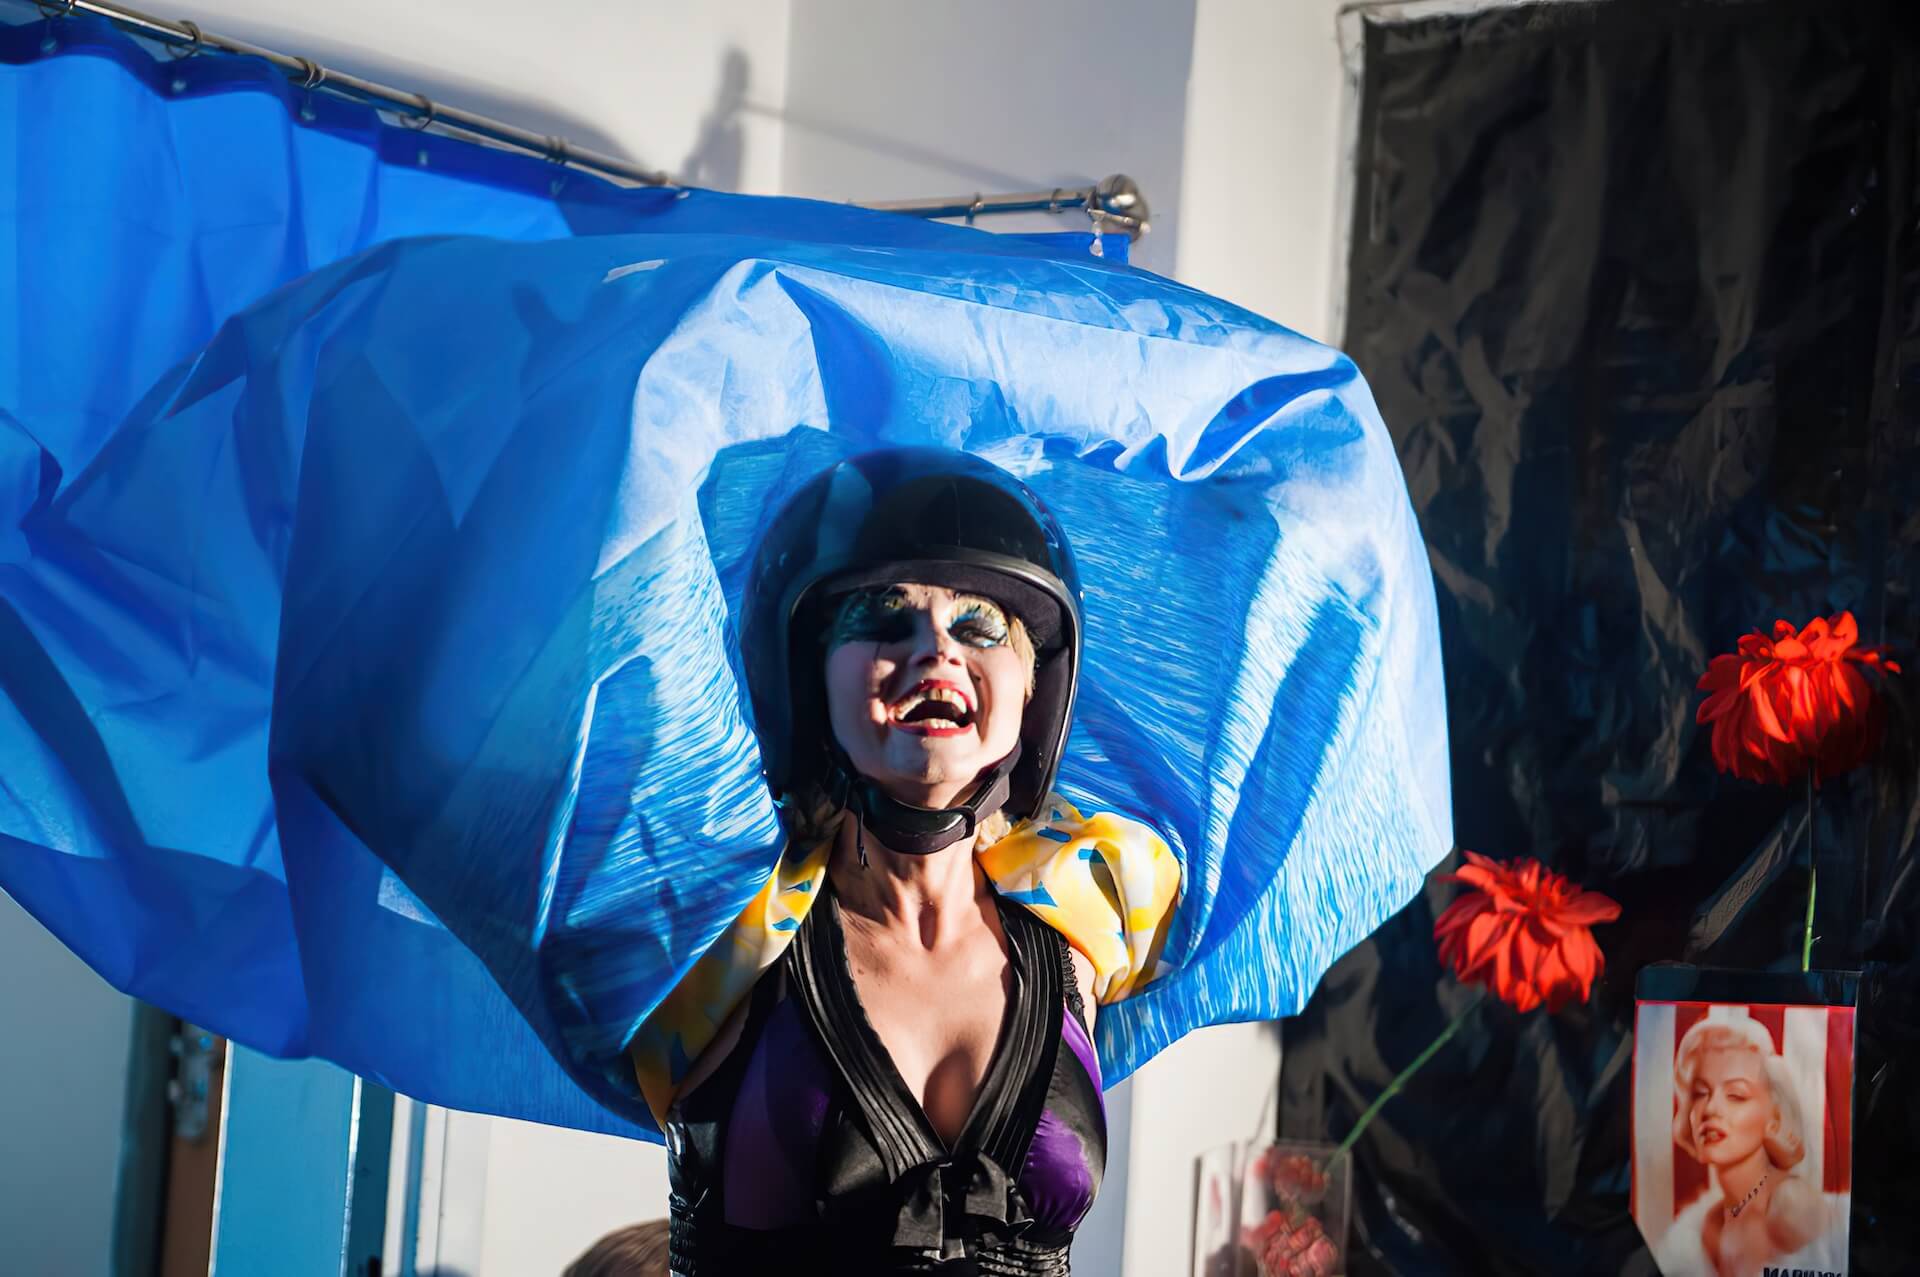 A woman with a heavy makeup wrapping herself with a blue curtain